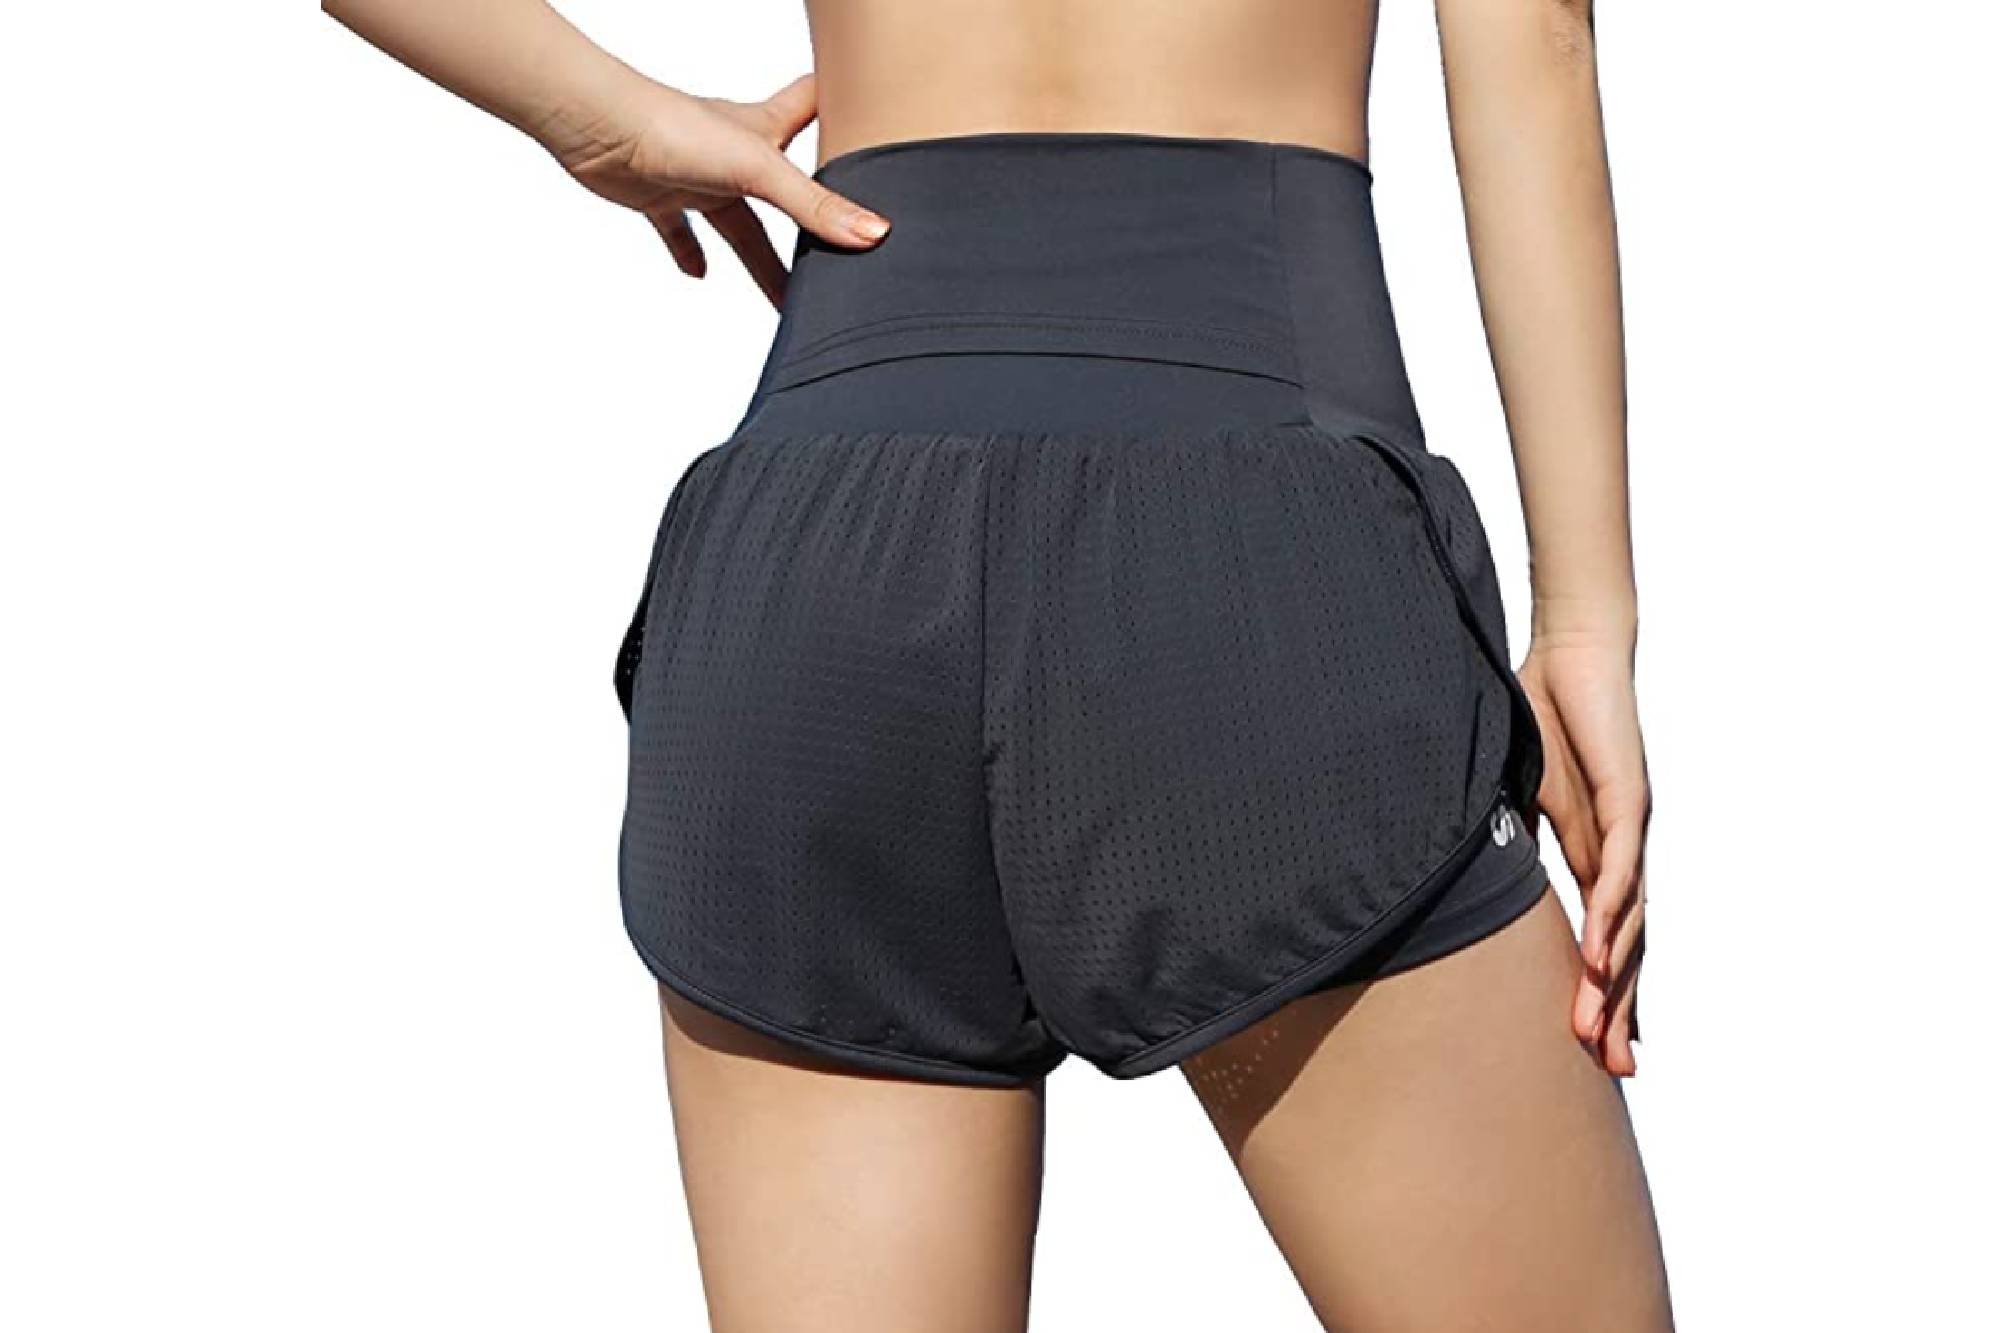 EDENCOMERS Athletic Shorts Were Made for Every Workout Imaginable